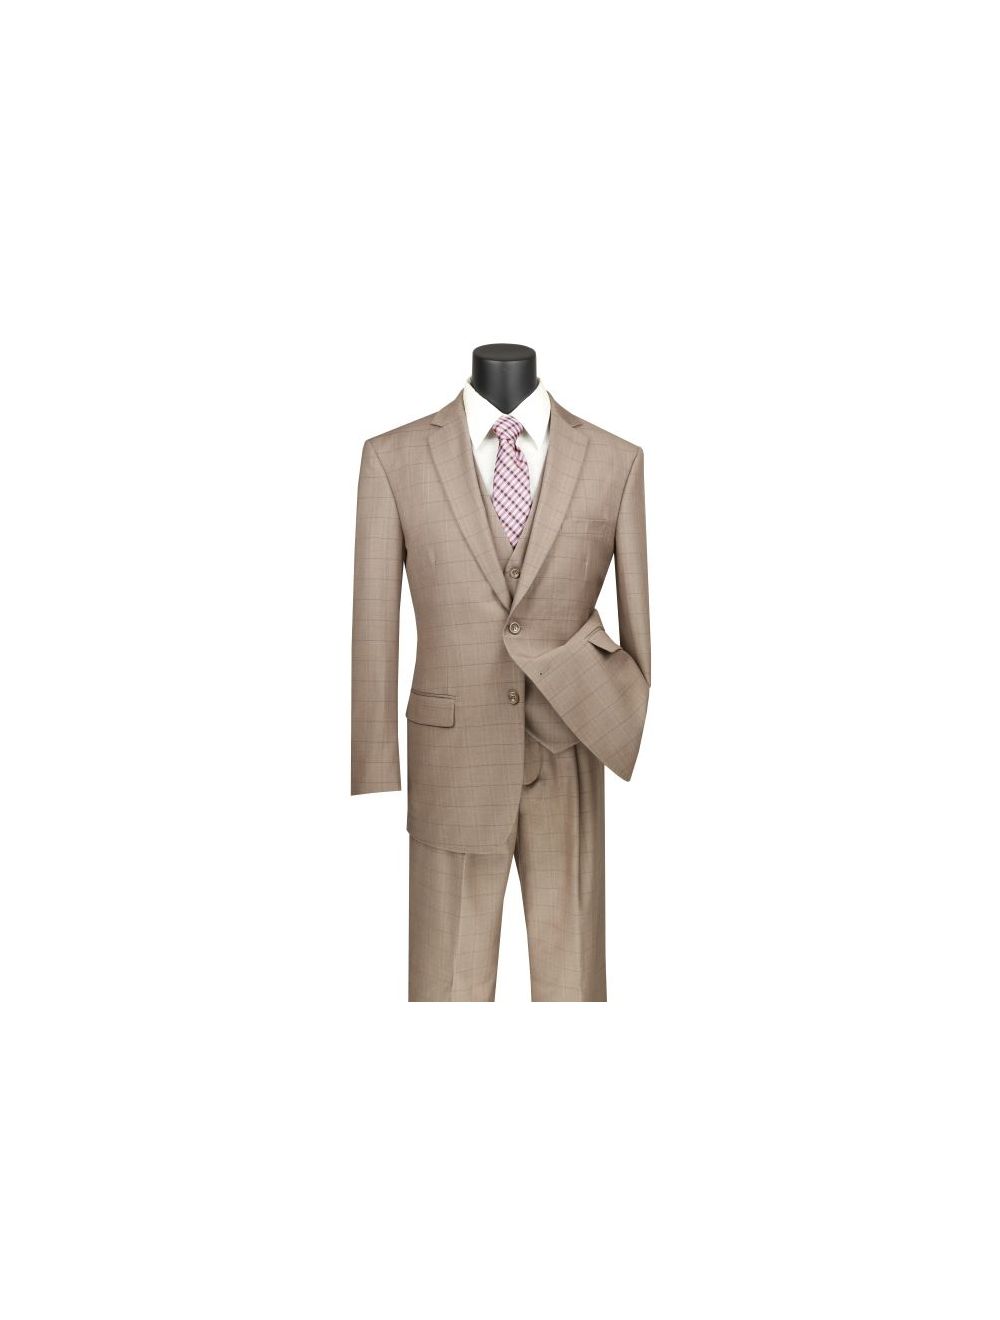 Men's Suit Single Breasted 2 Button 3 Piece Classic Fit Windowpane Tan V2RW-15